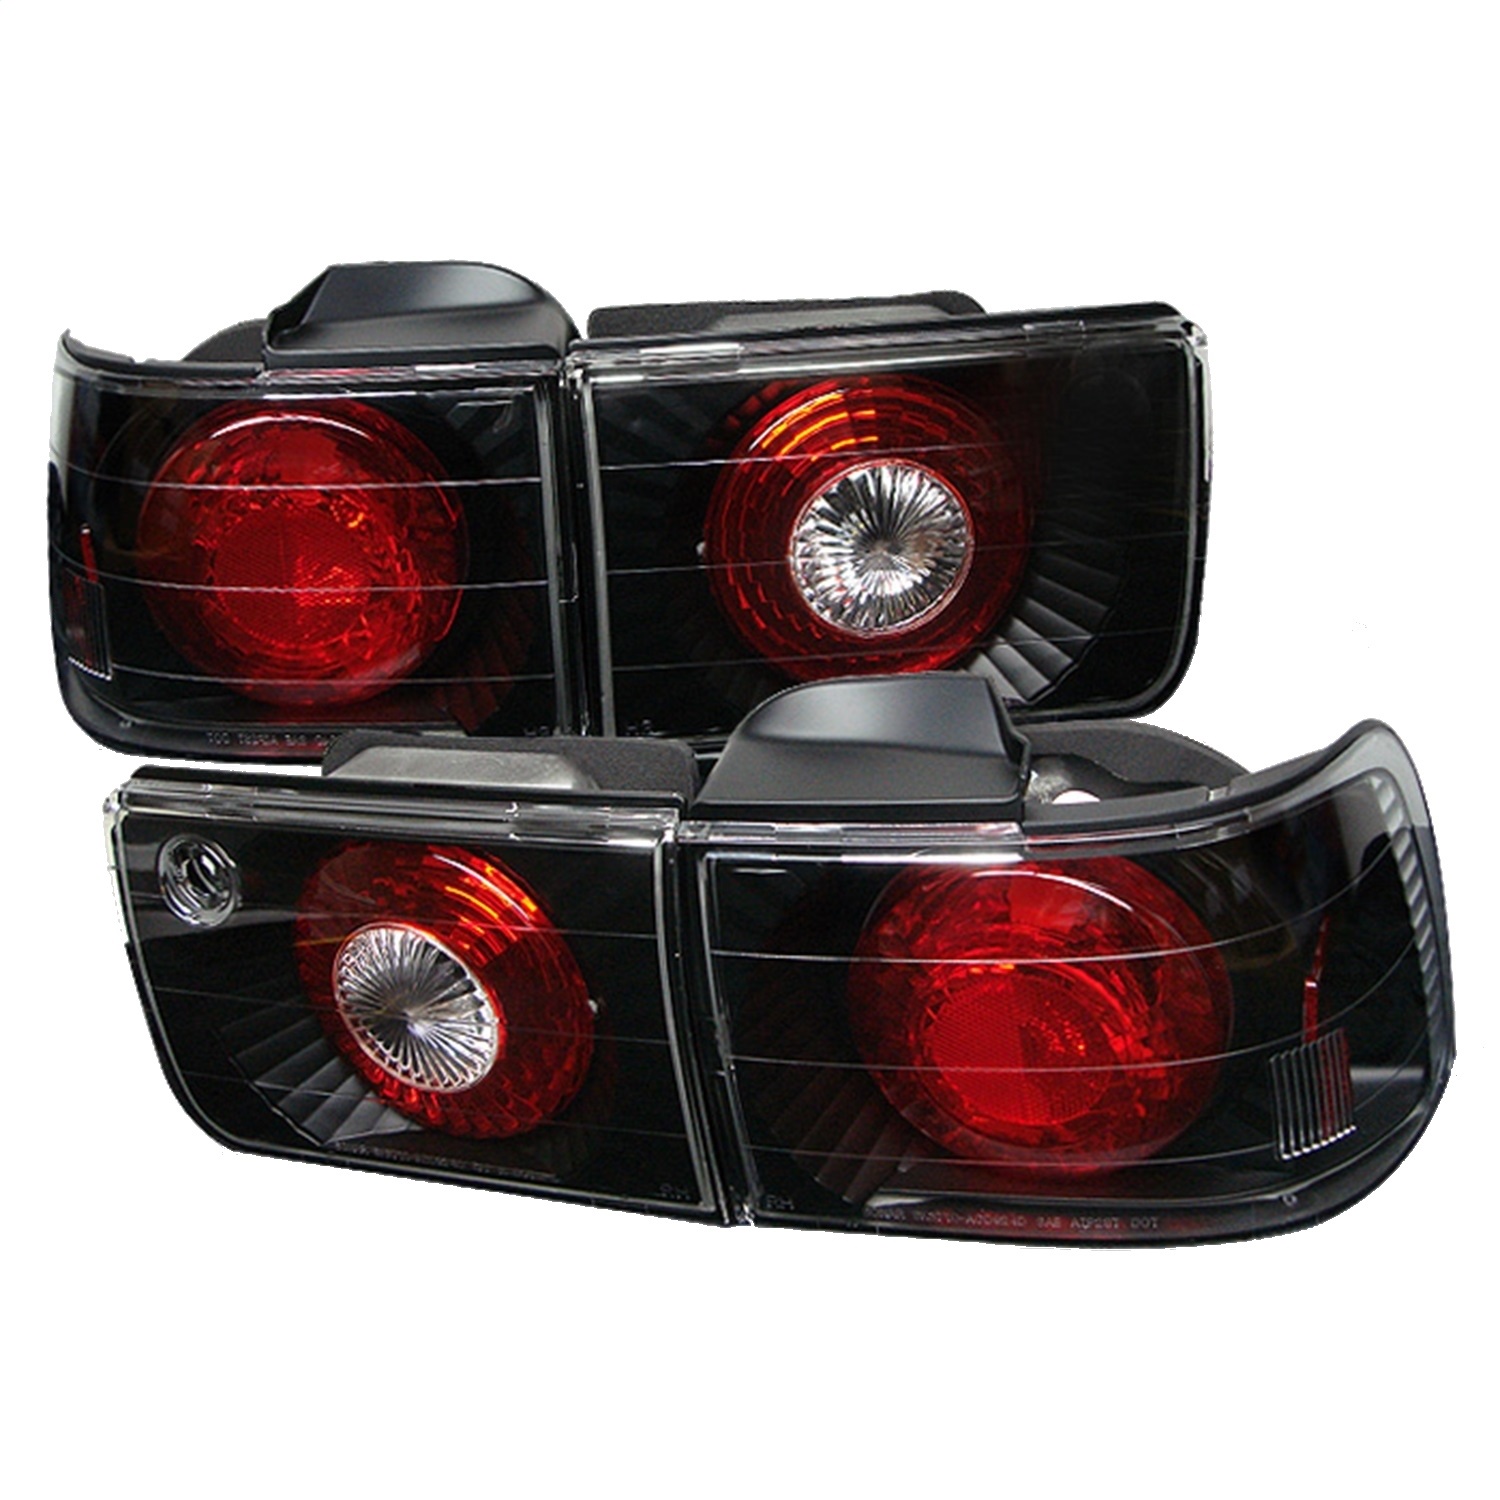 Spyder Auto 5004093 Euro Style Tail Lights Fits 92-93 Accord